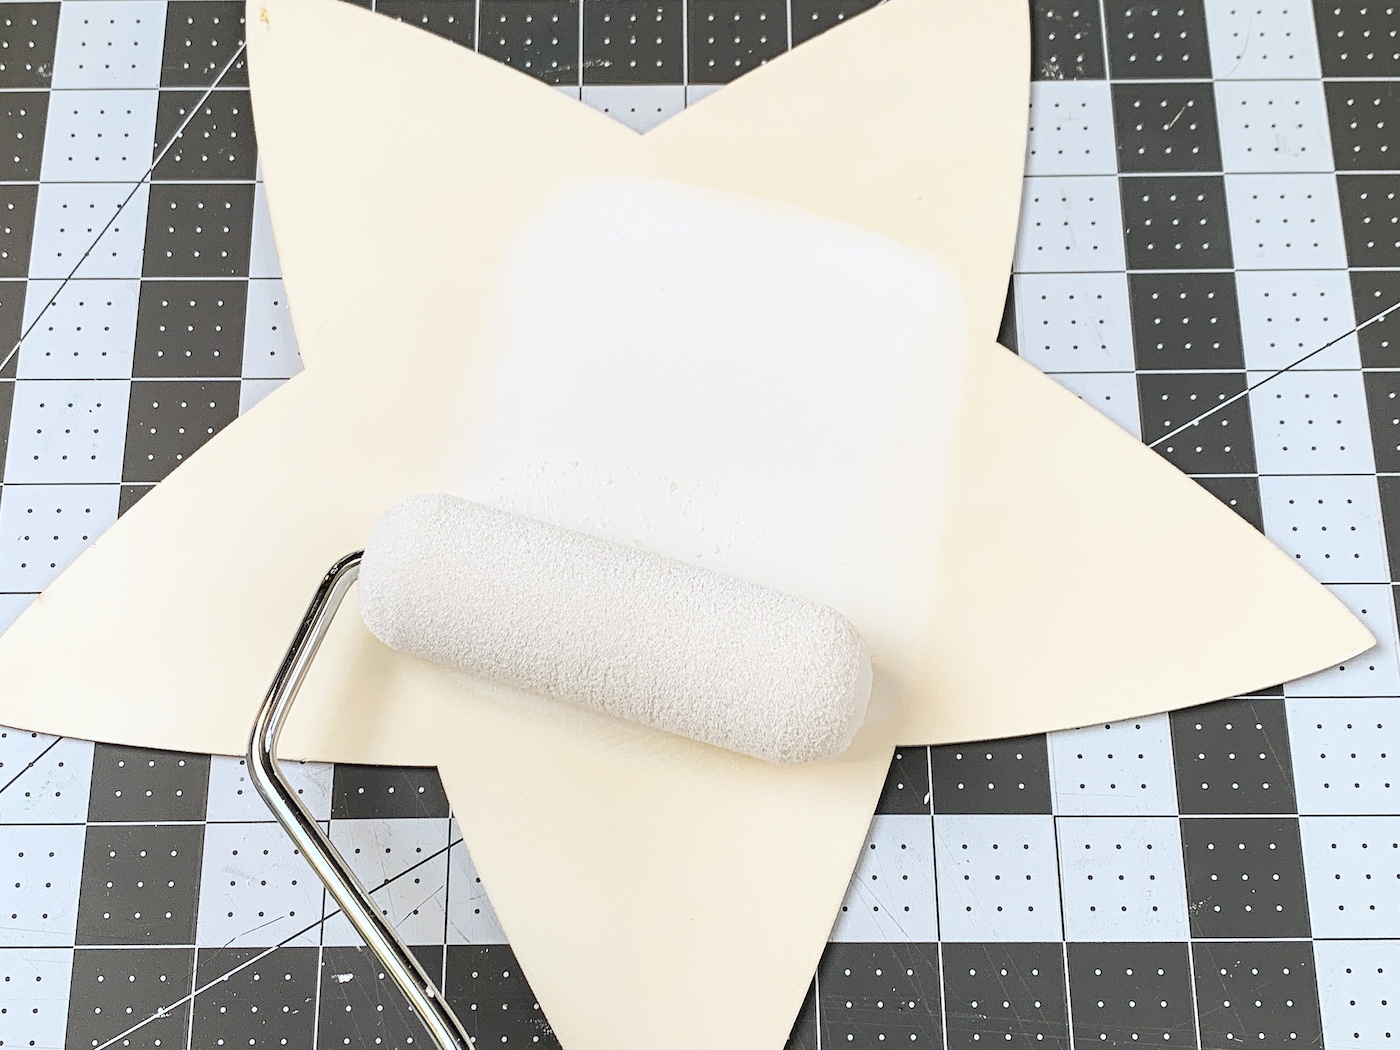 Painting a wood star with white using a foam roller